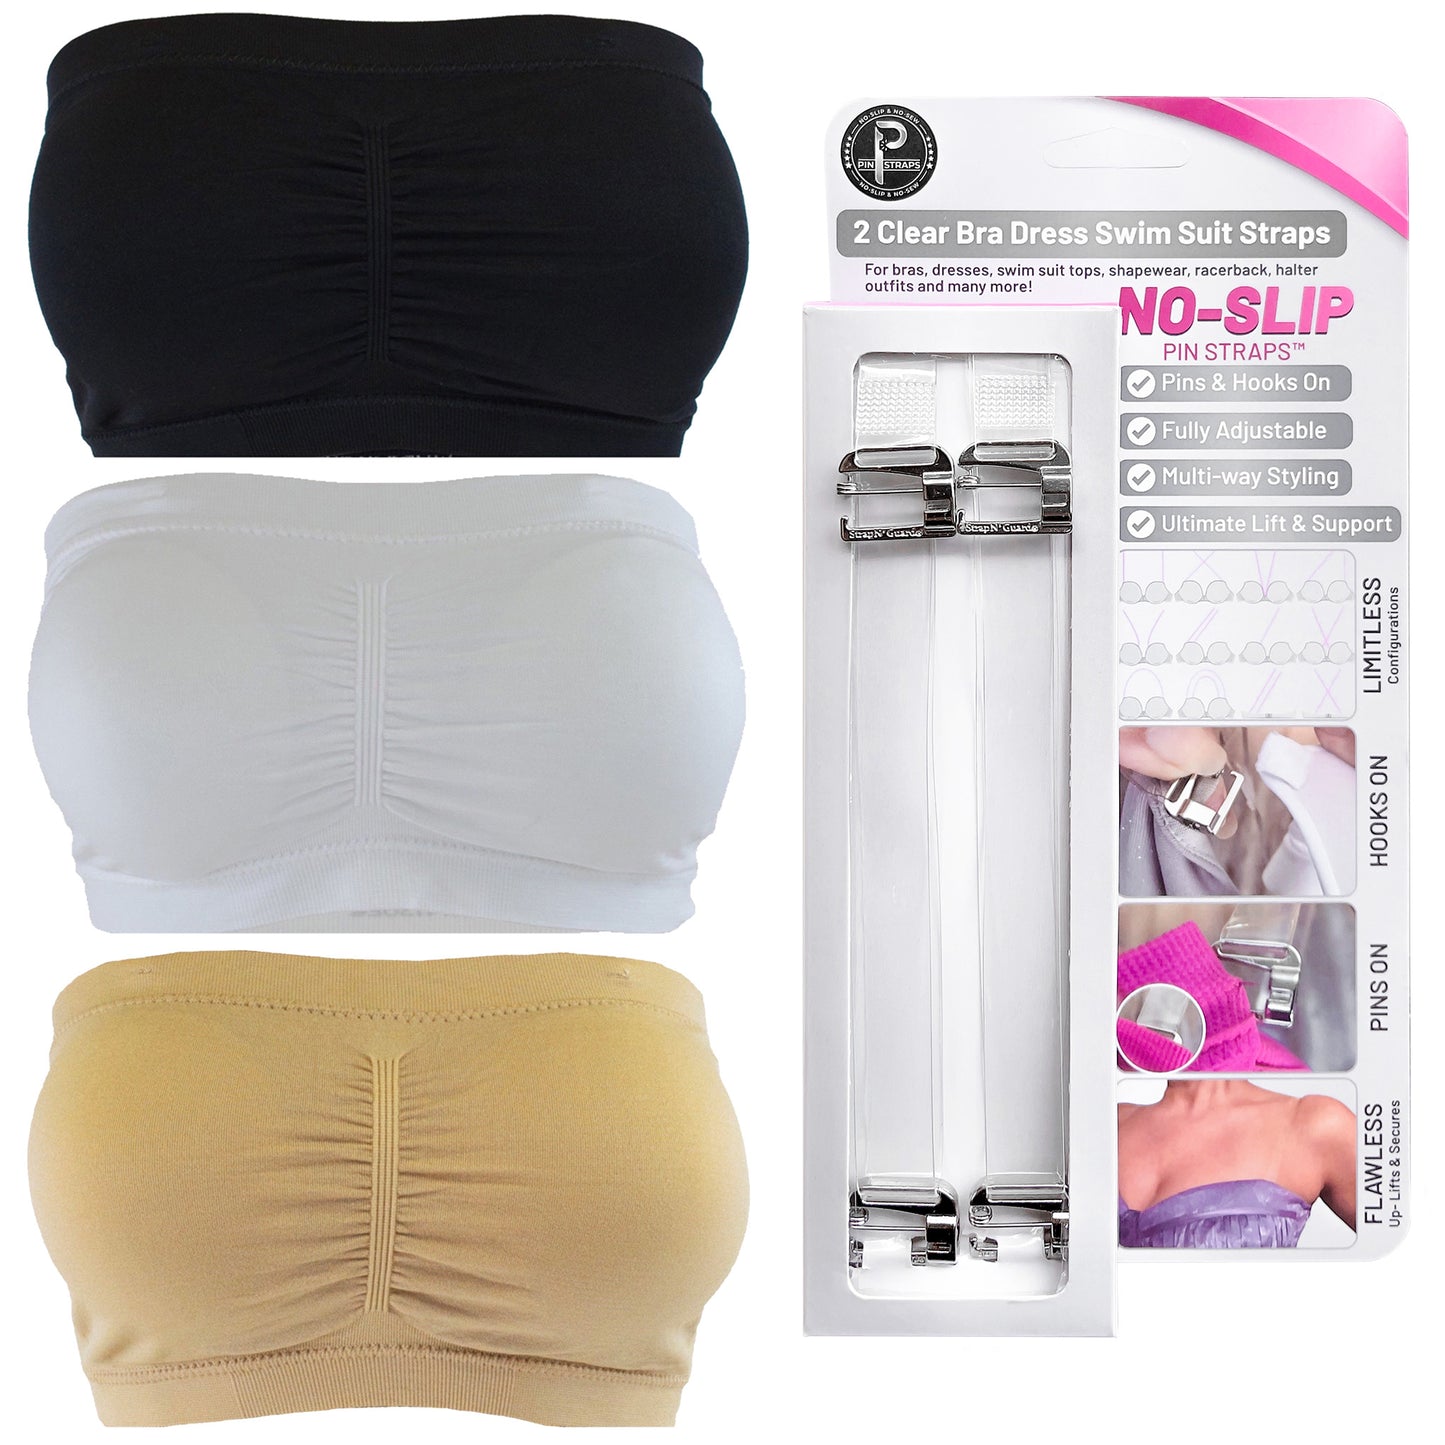 Padded Tube Top Bra (in Black, White or Nude) with Clear Straps